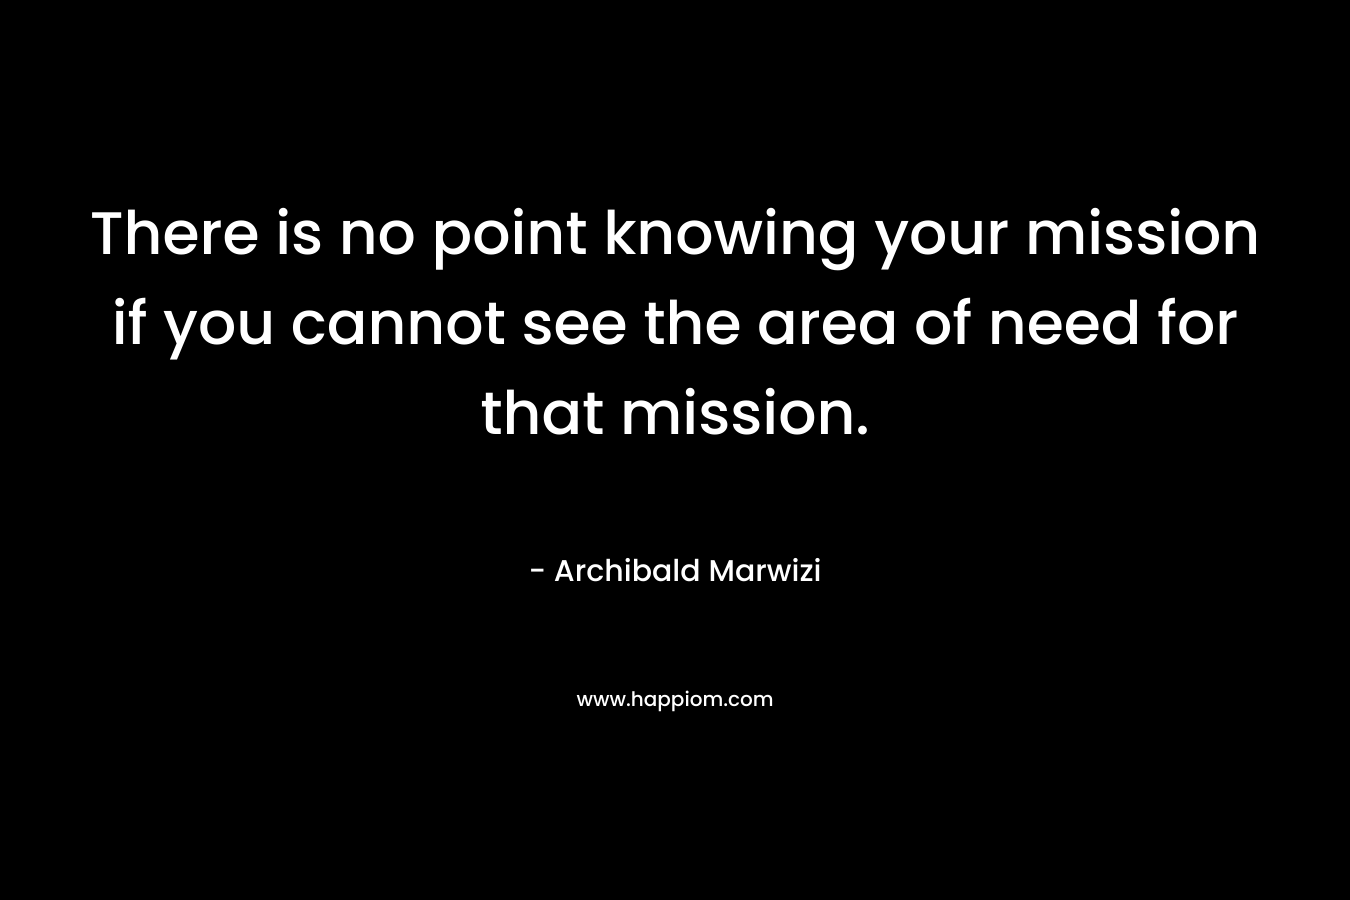 There is no point knowing your mission if you cannot see the area of need for that mission.